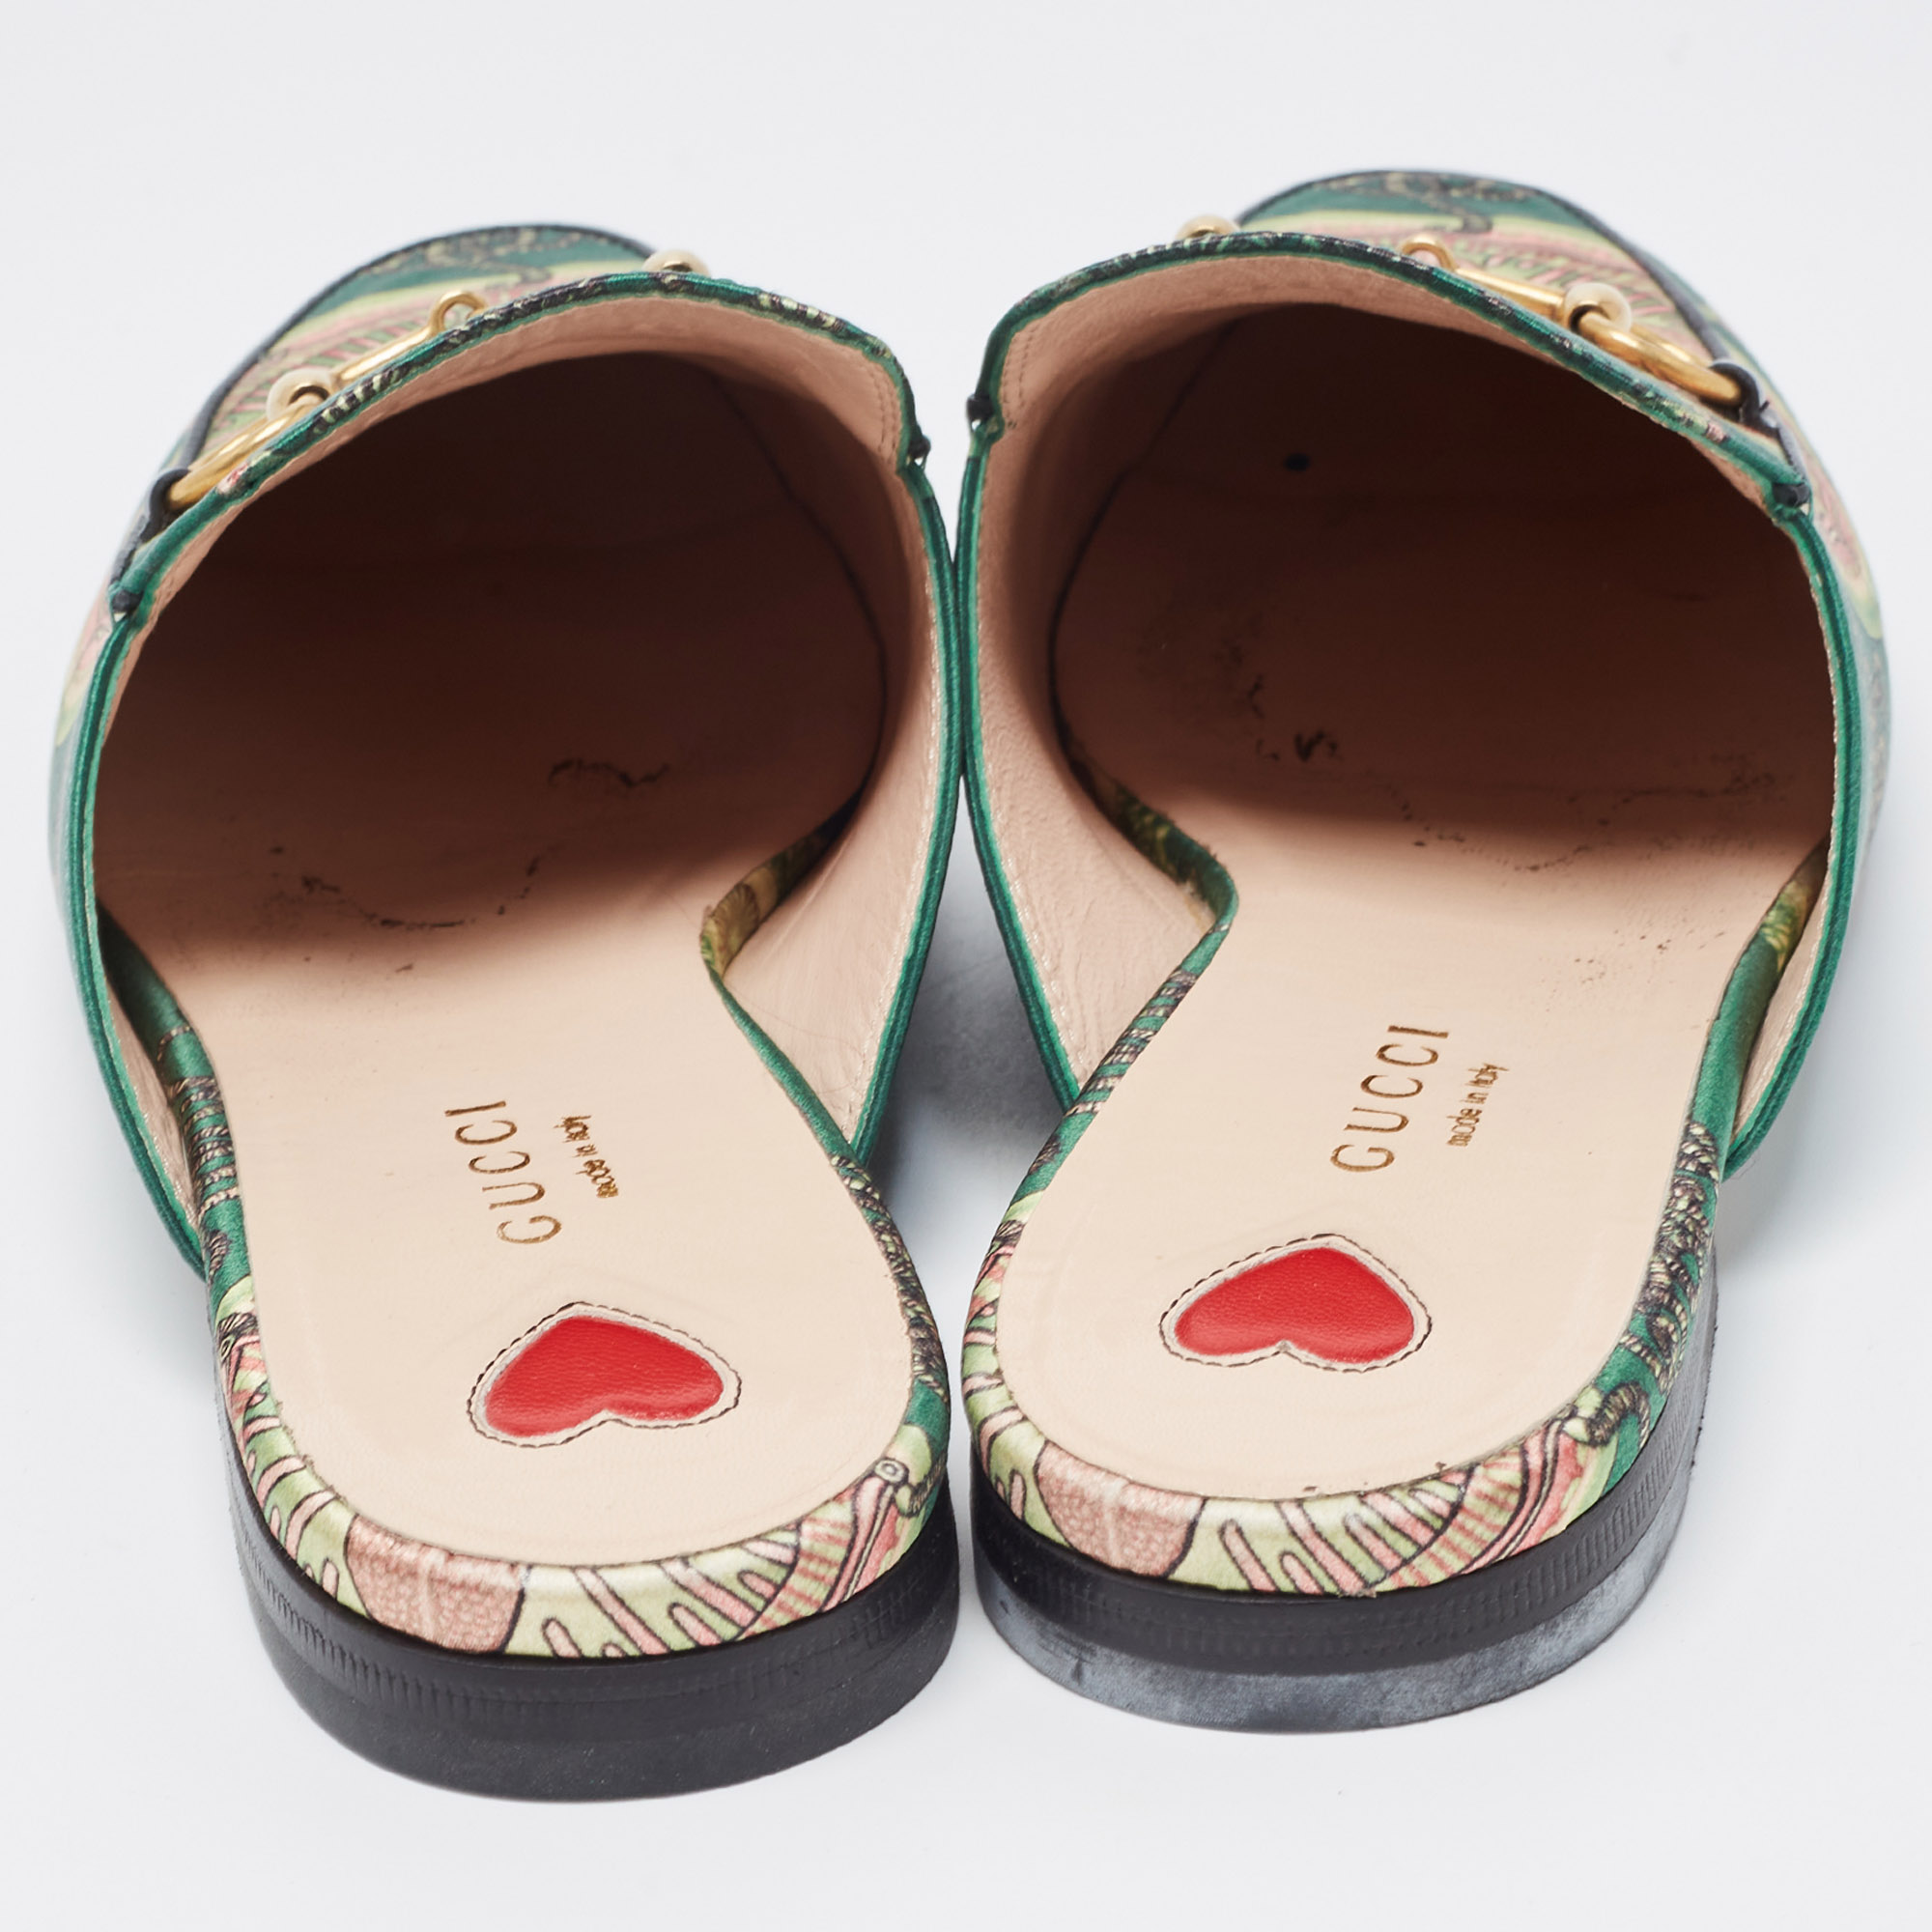 Gucci Green Printed Satin Princetown Mules Size 37